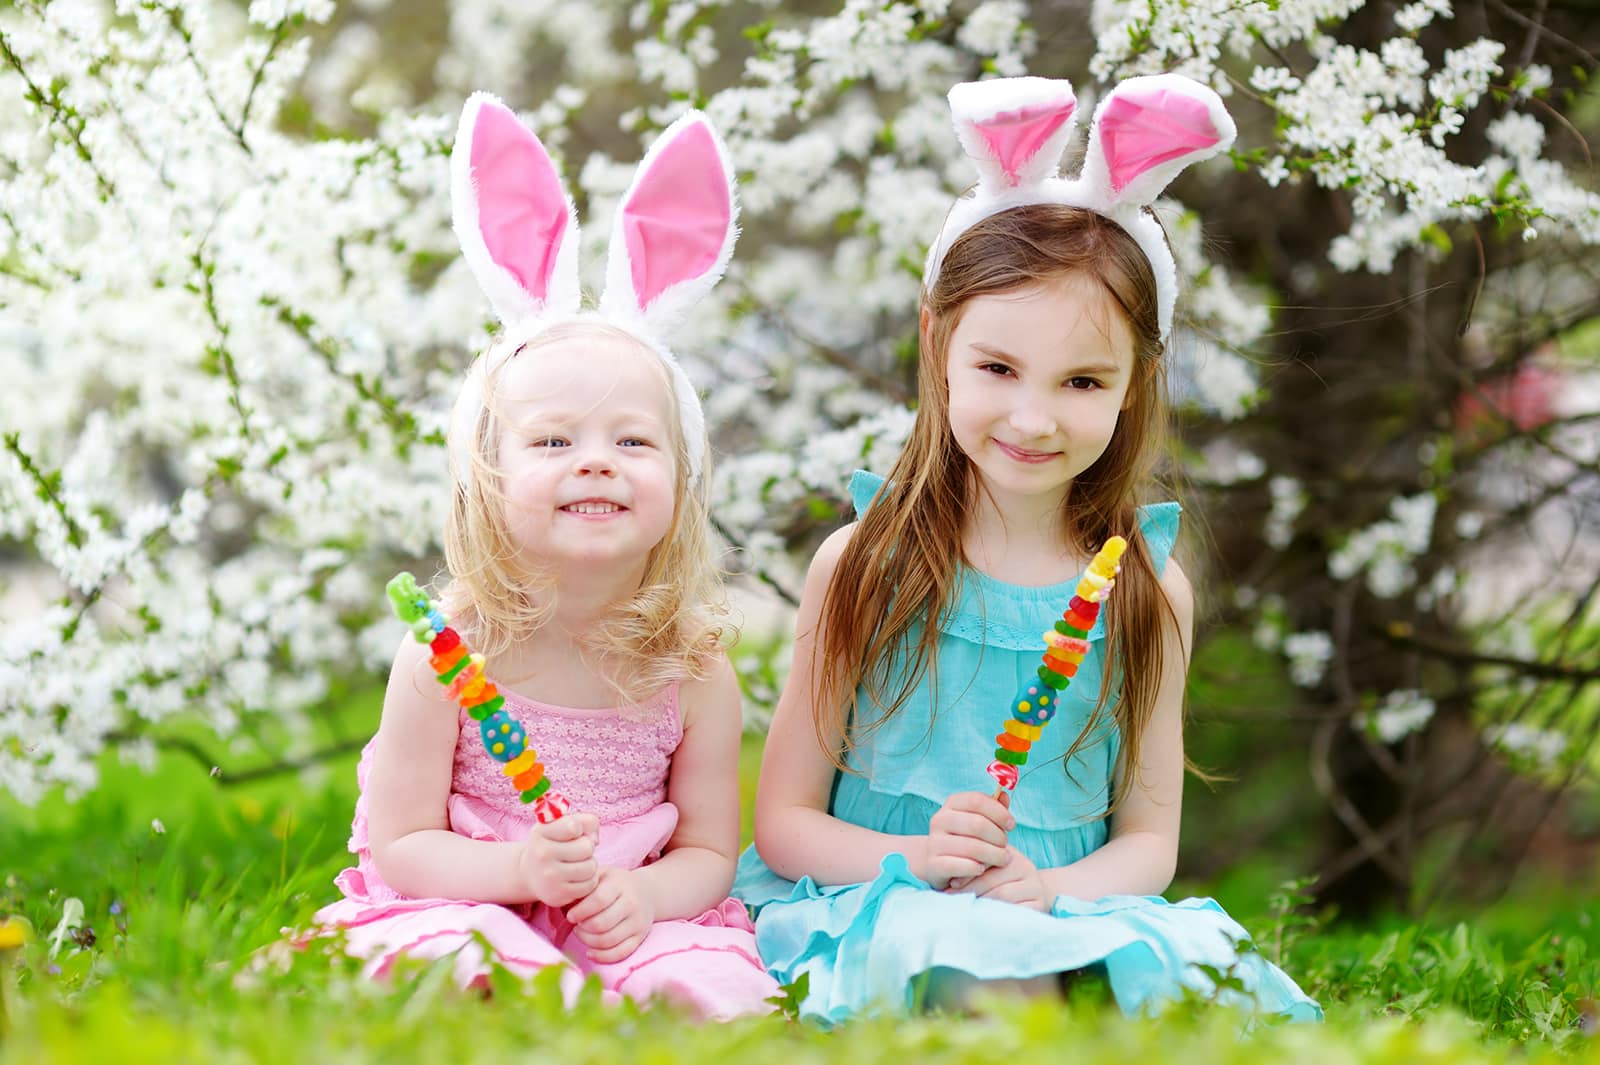 Featured image for “Ask Your Edinburg Dentist: How to Choose Easter Candy for Better Dental Health”